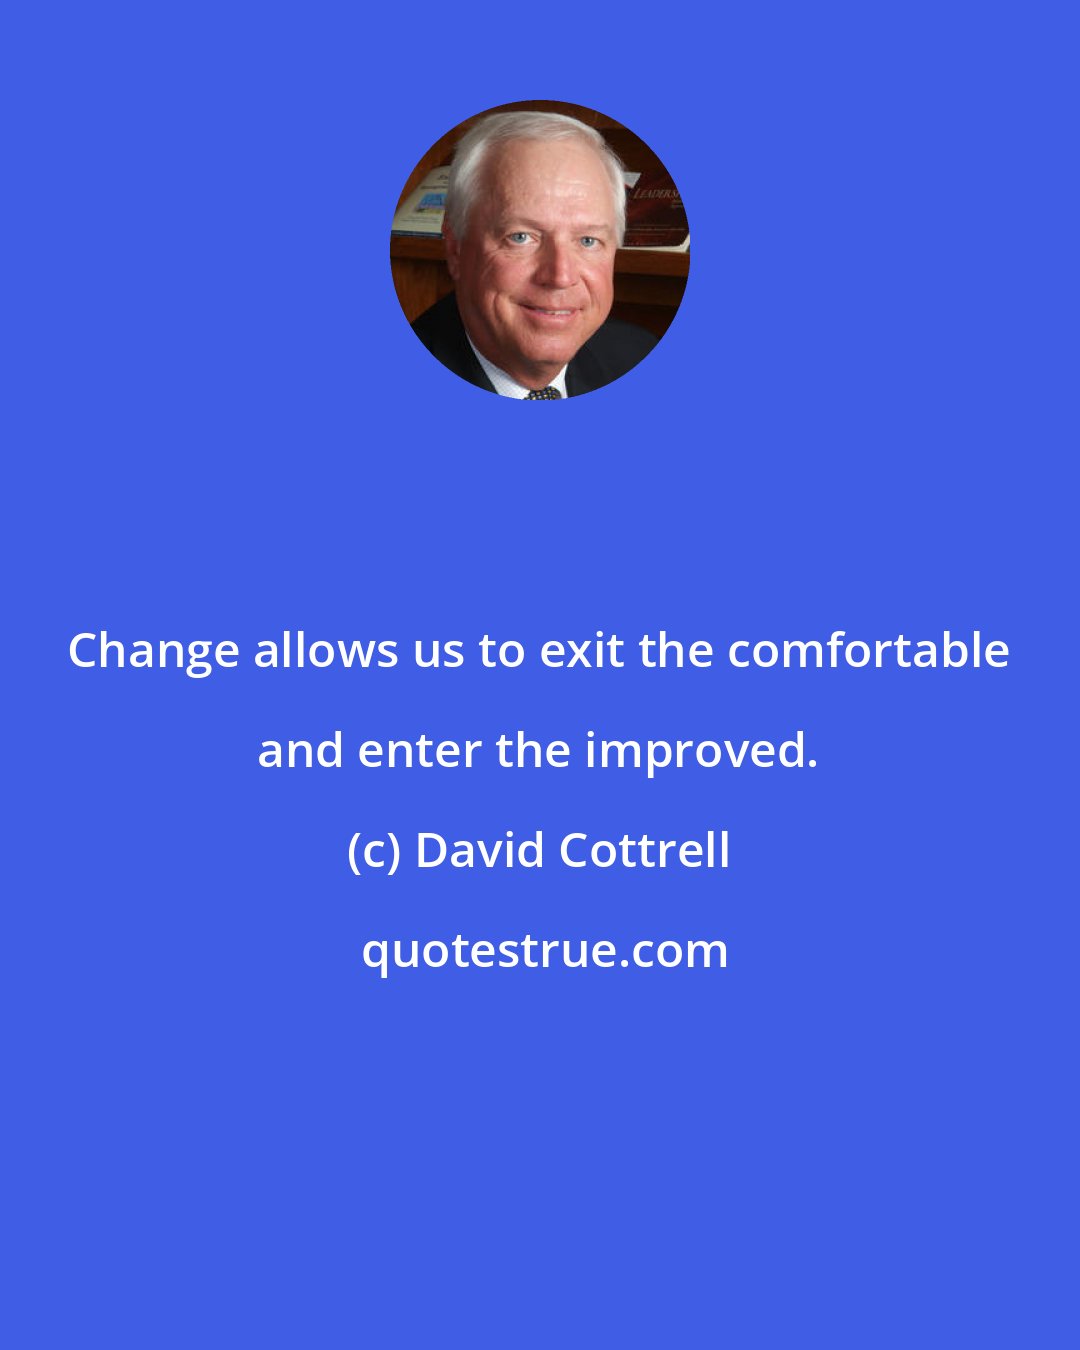 David Cottrell: Change allows us to exit the comfortable and enter the improved.